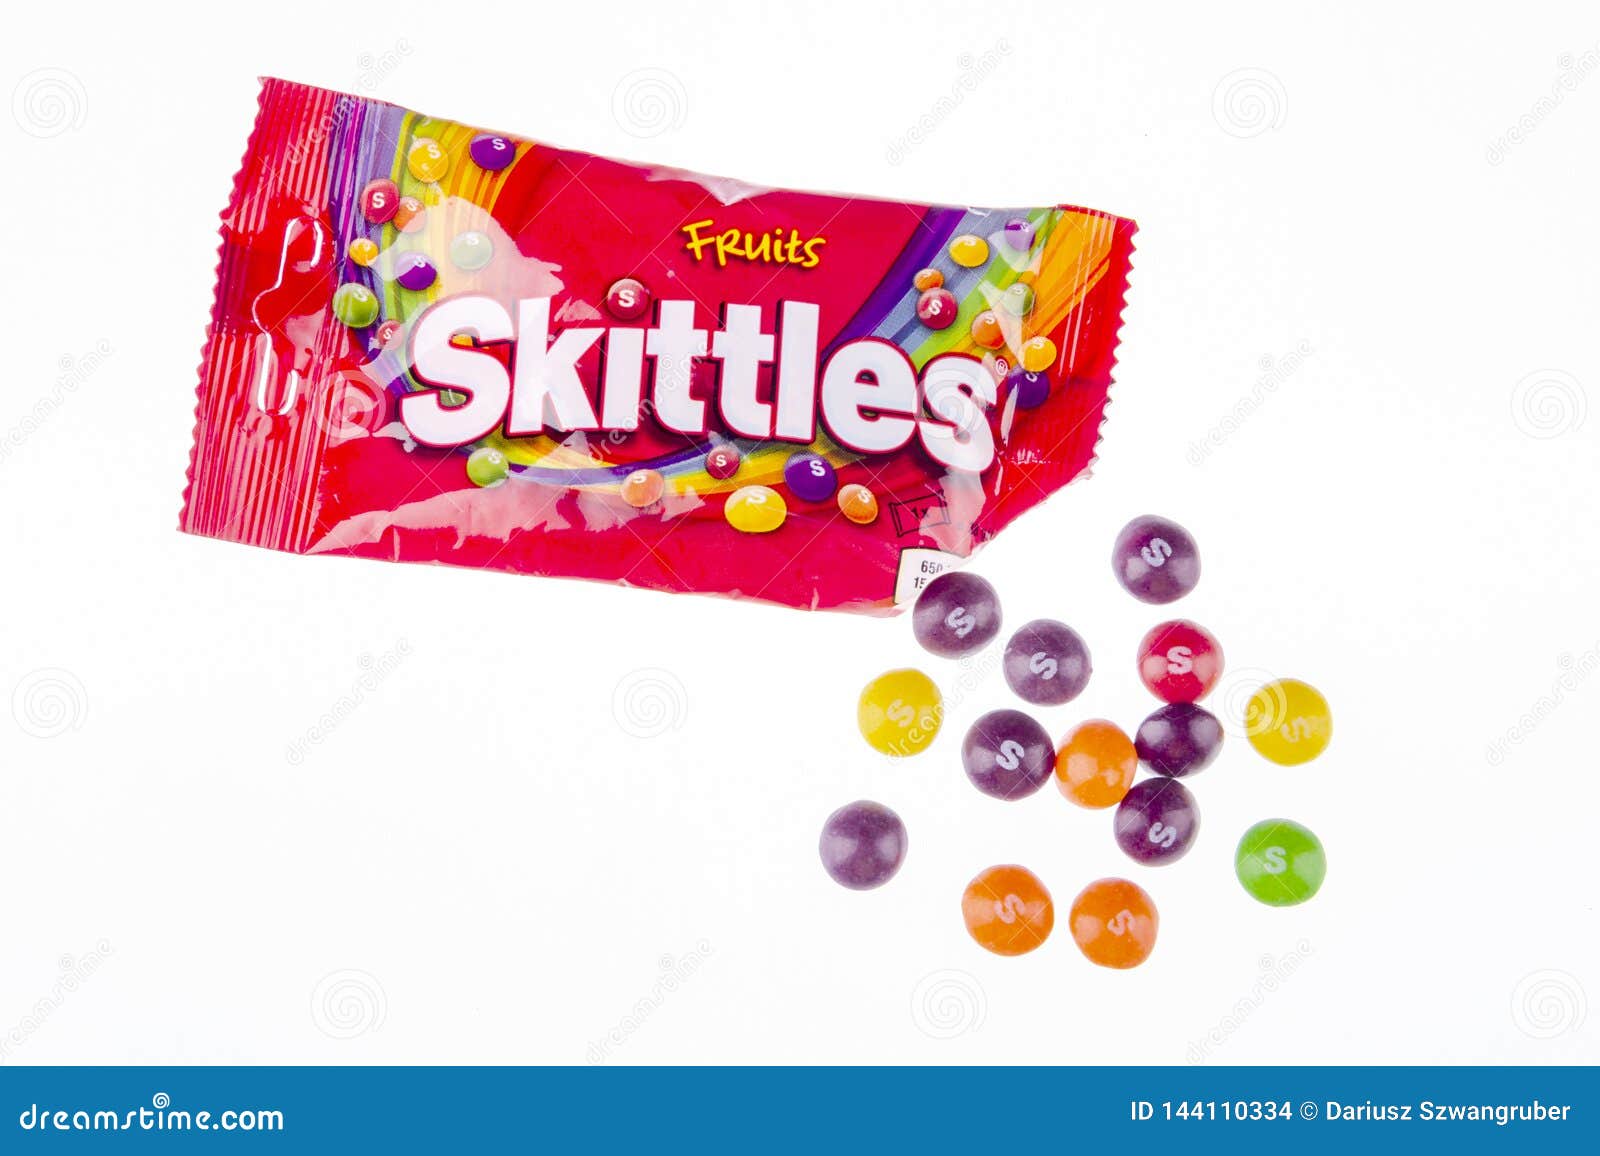 Skittles Fruit Flavoured Candies Isolated On White Background